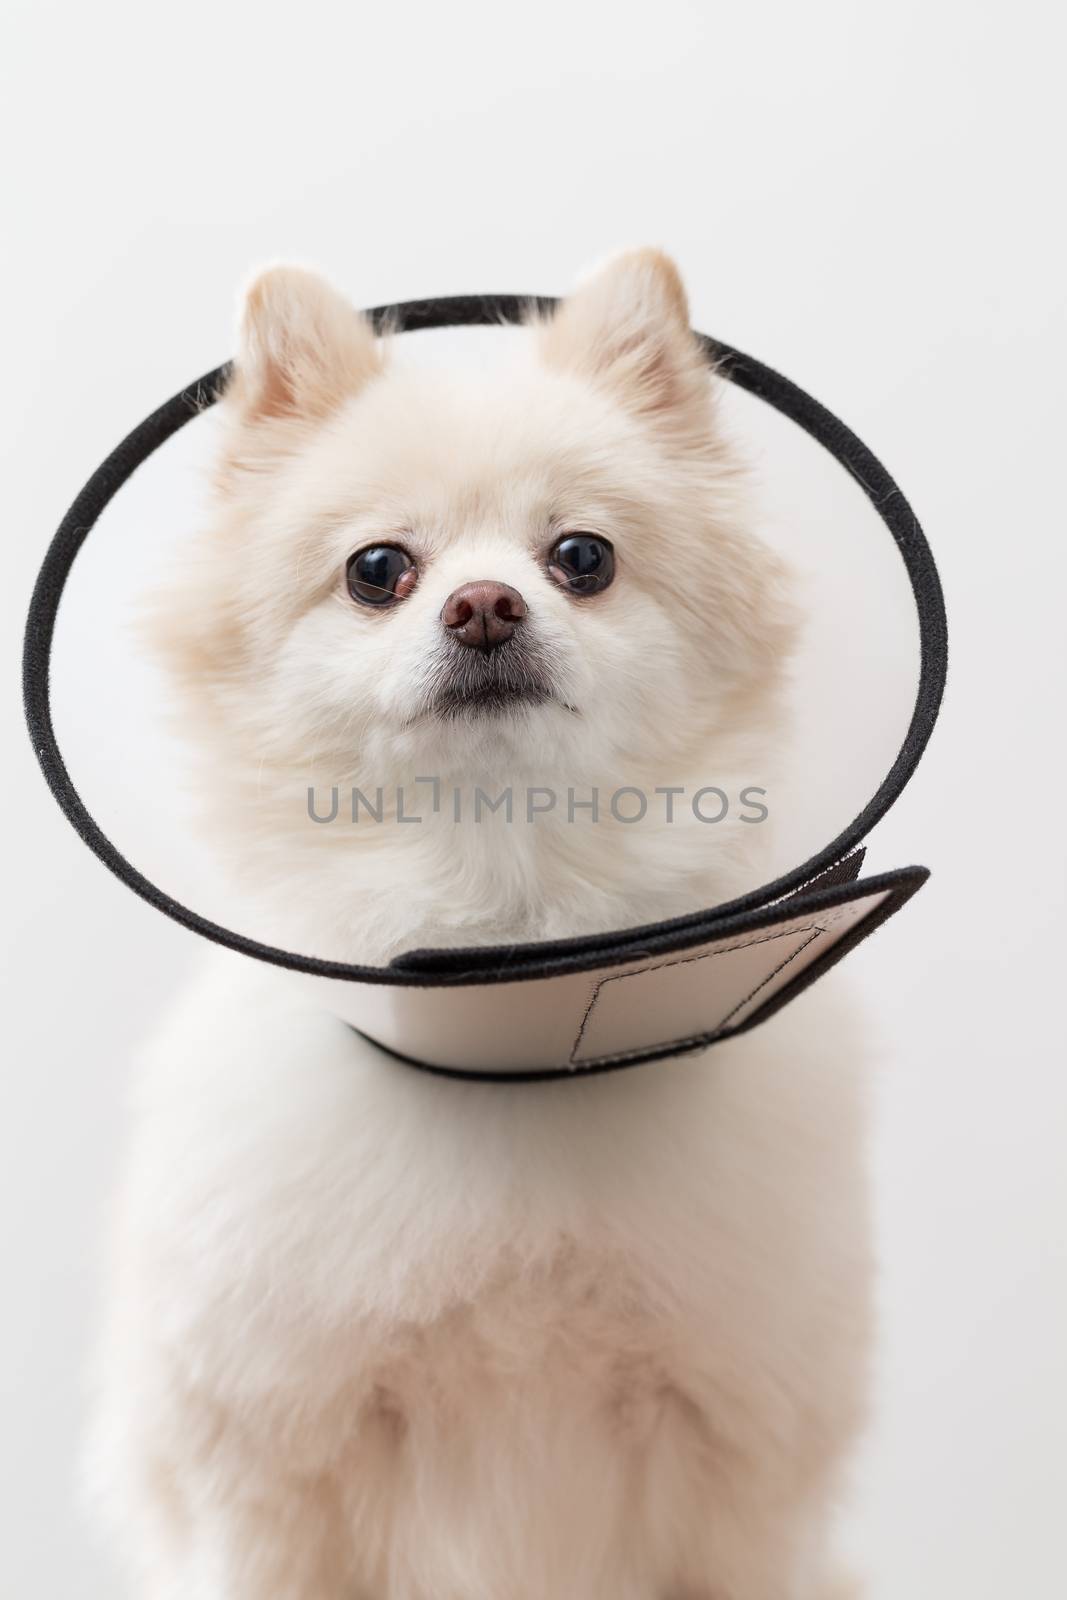 White Pomeranian with protective collar